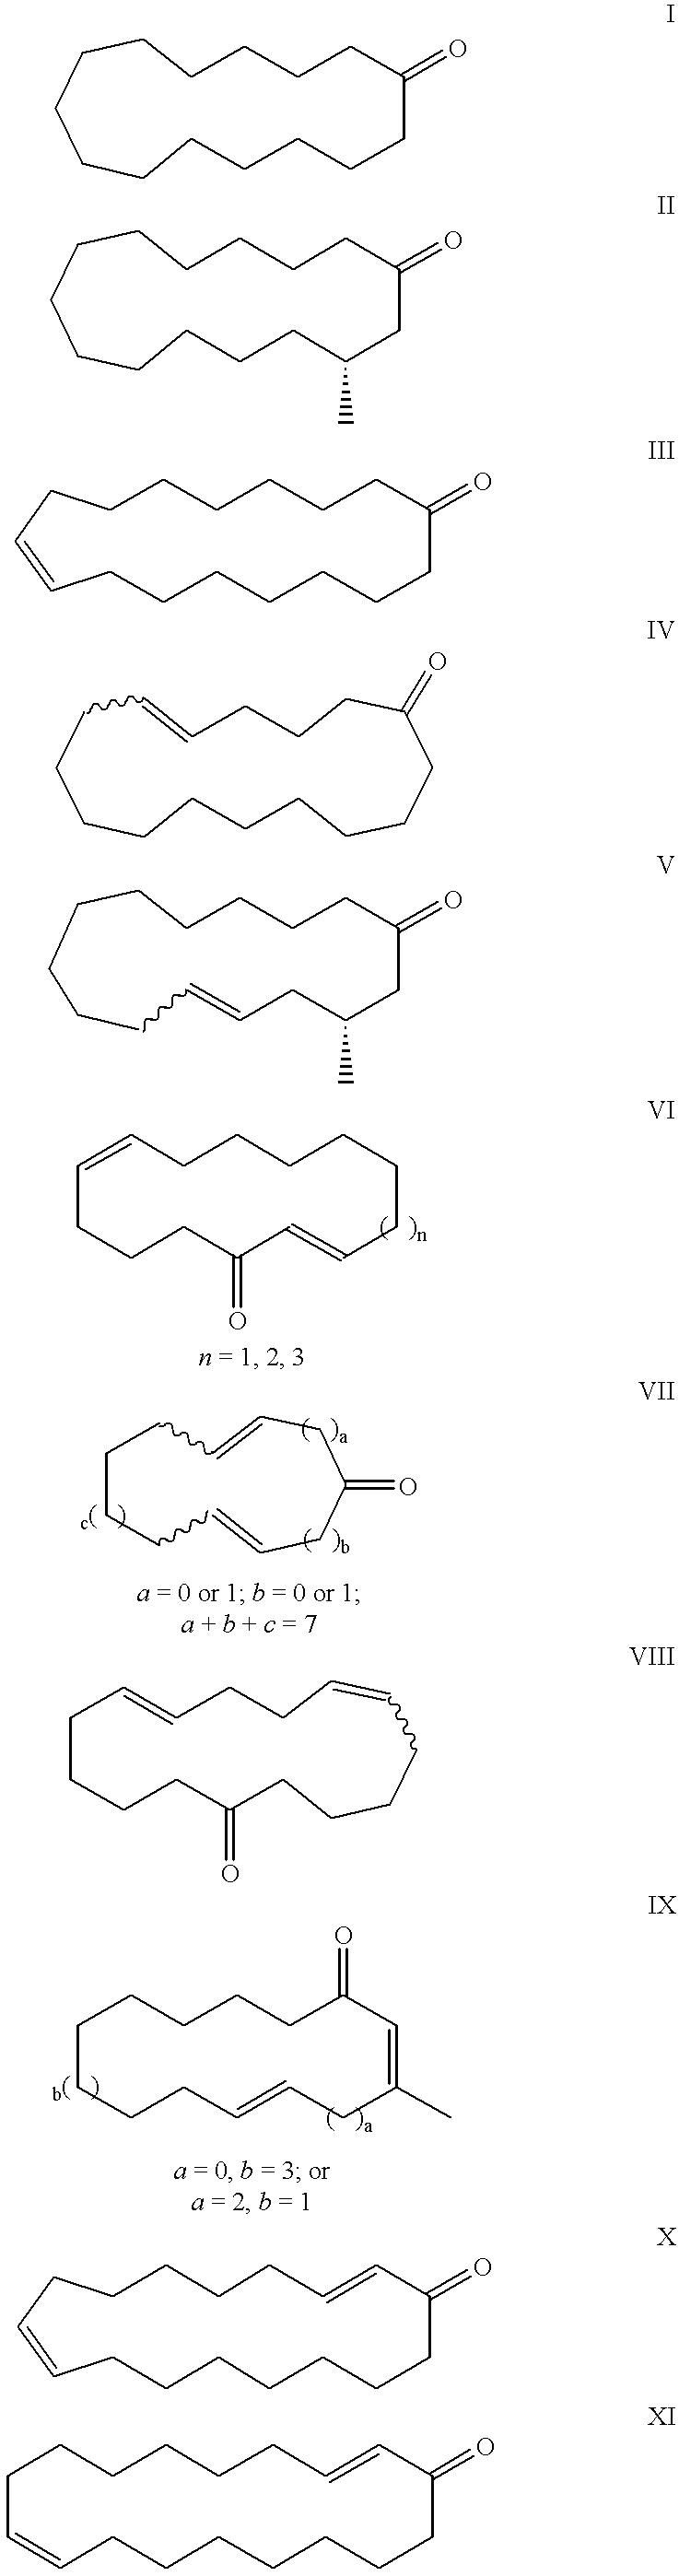 Macrocyclic ketones as fragrance materials and methods for making same